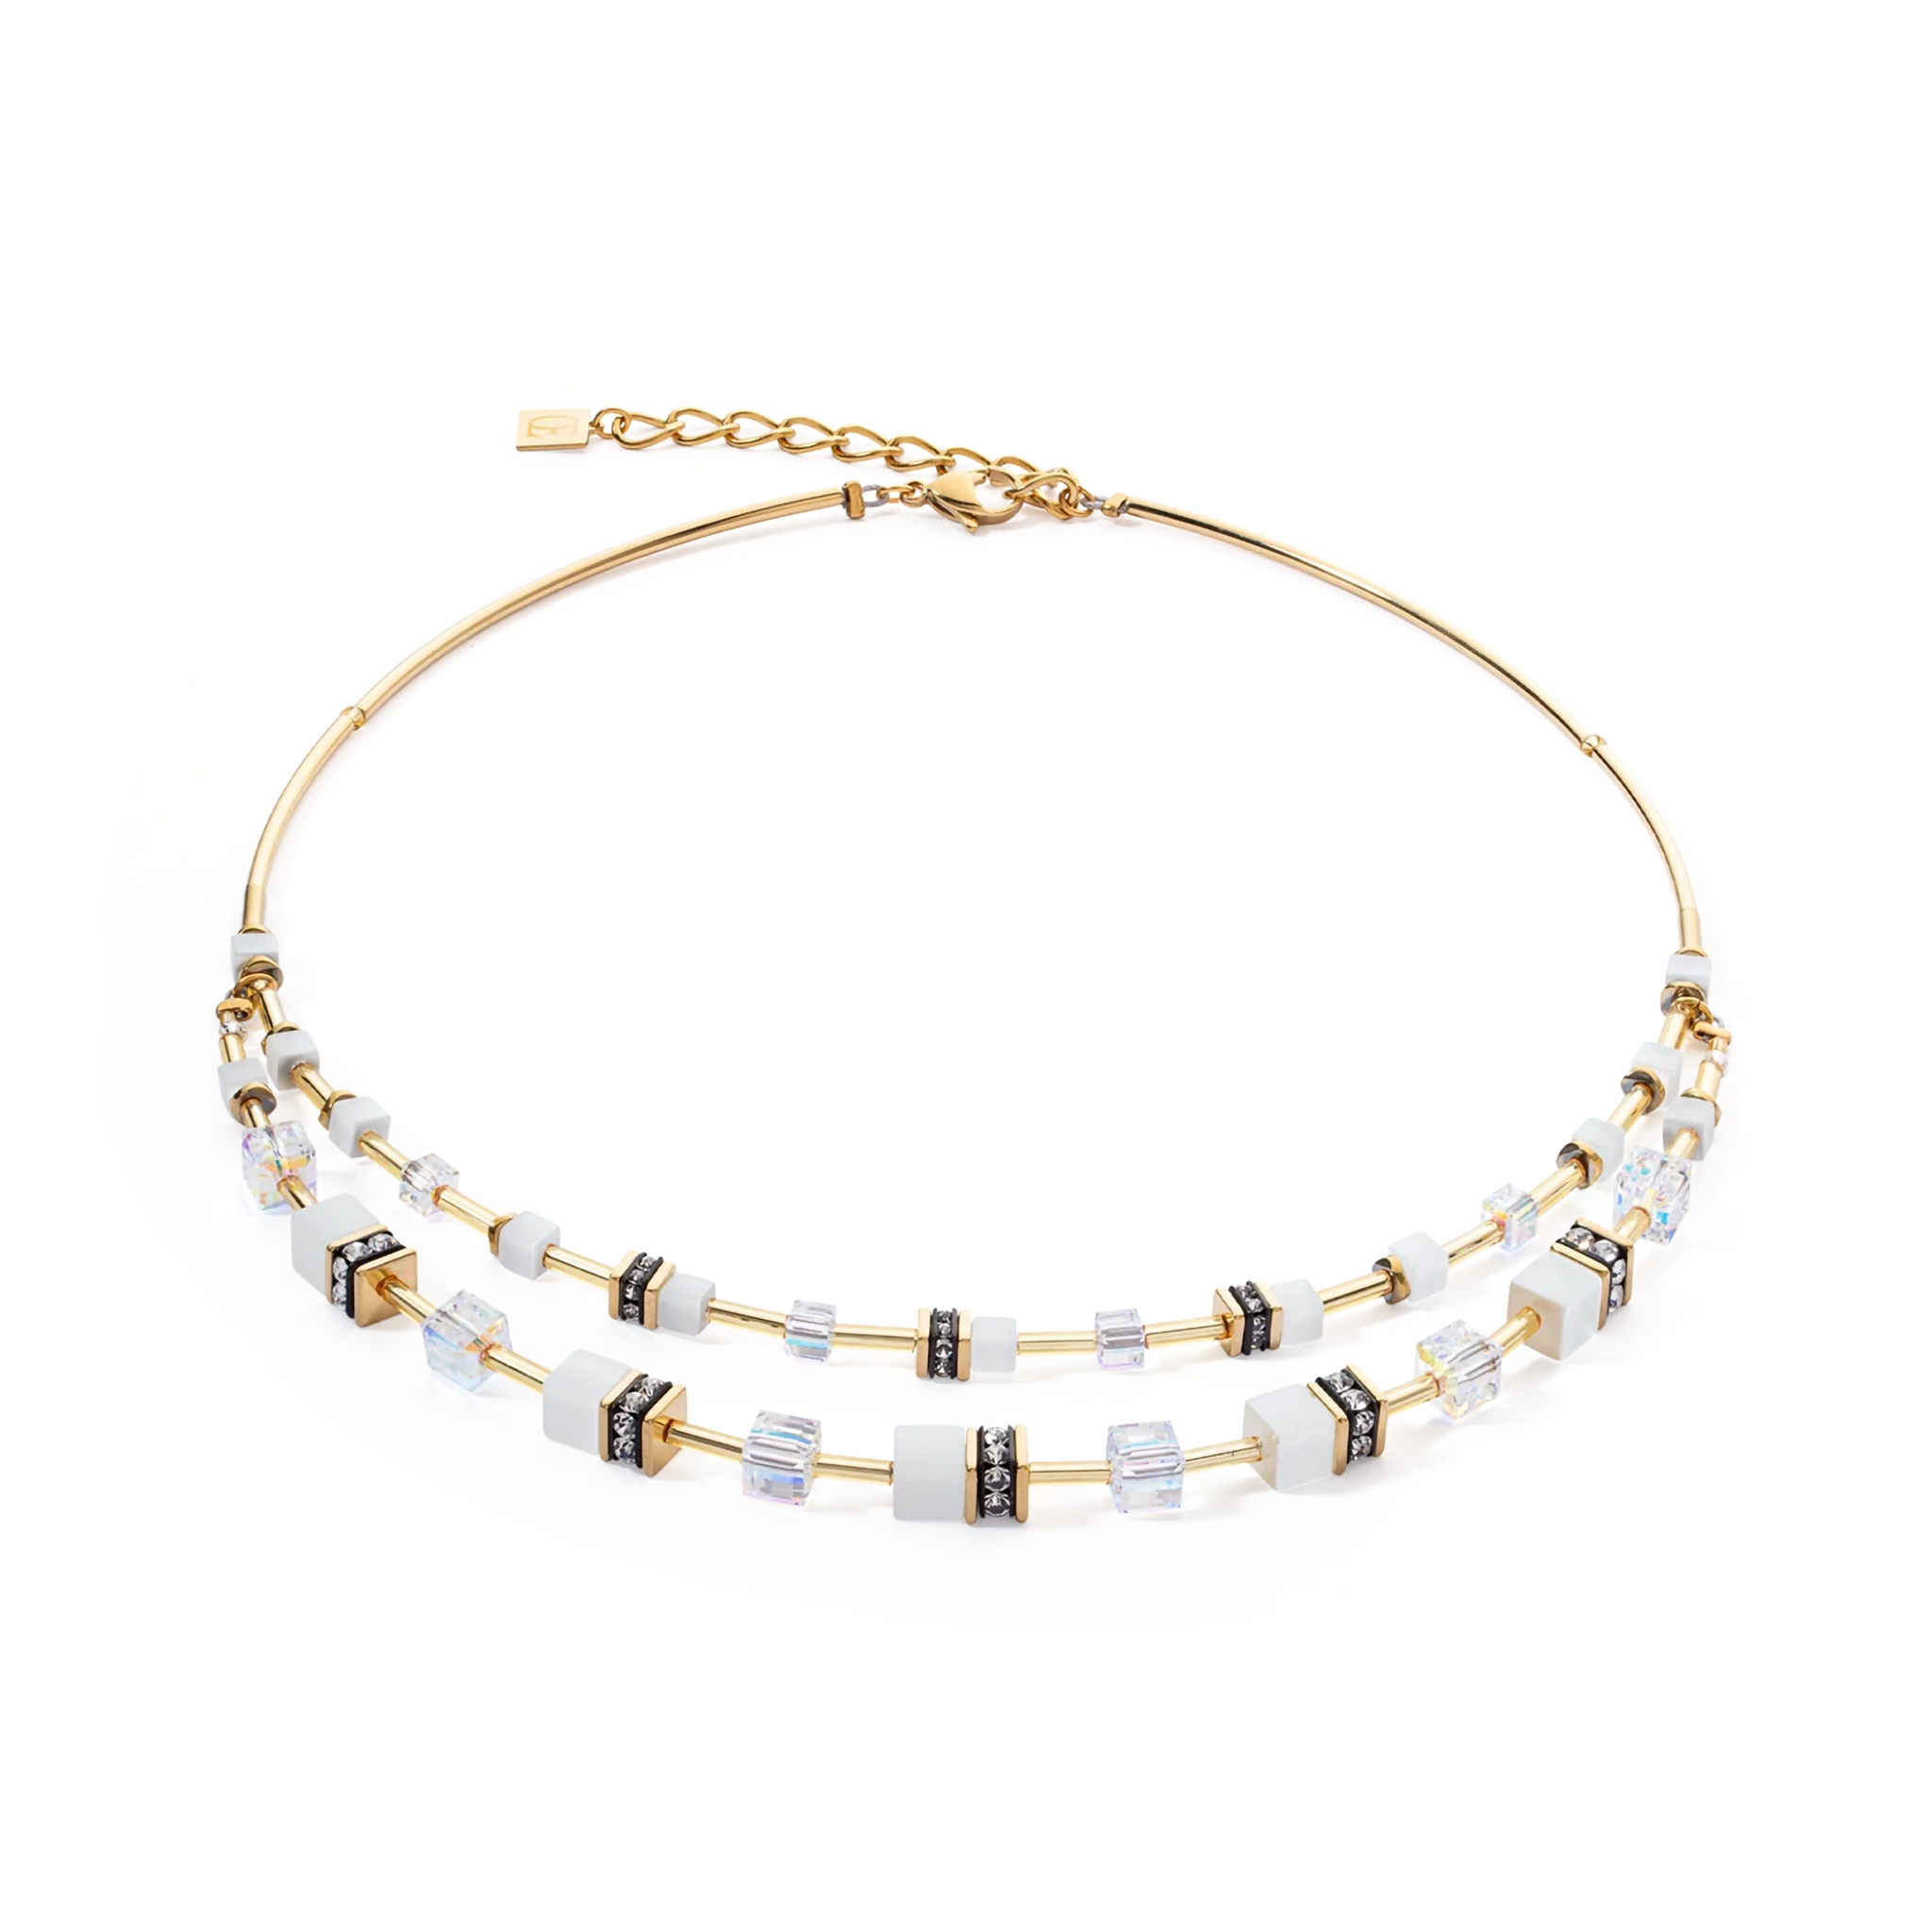 A double layer gold steel necklace with white cube beads